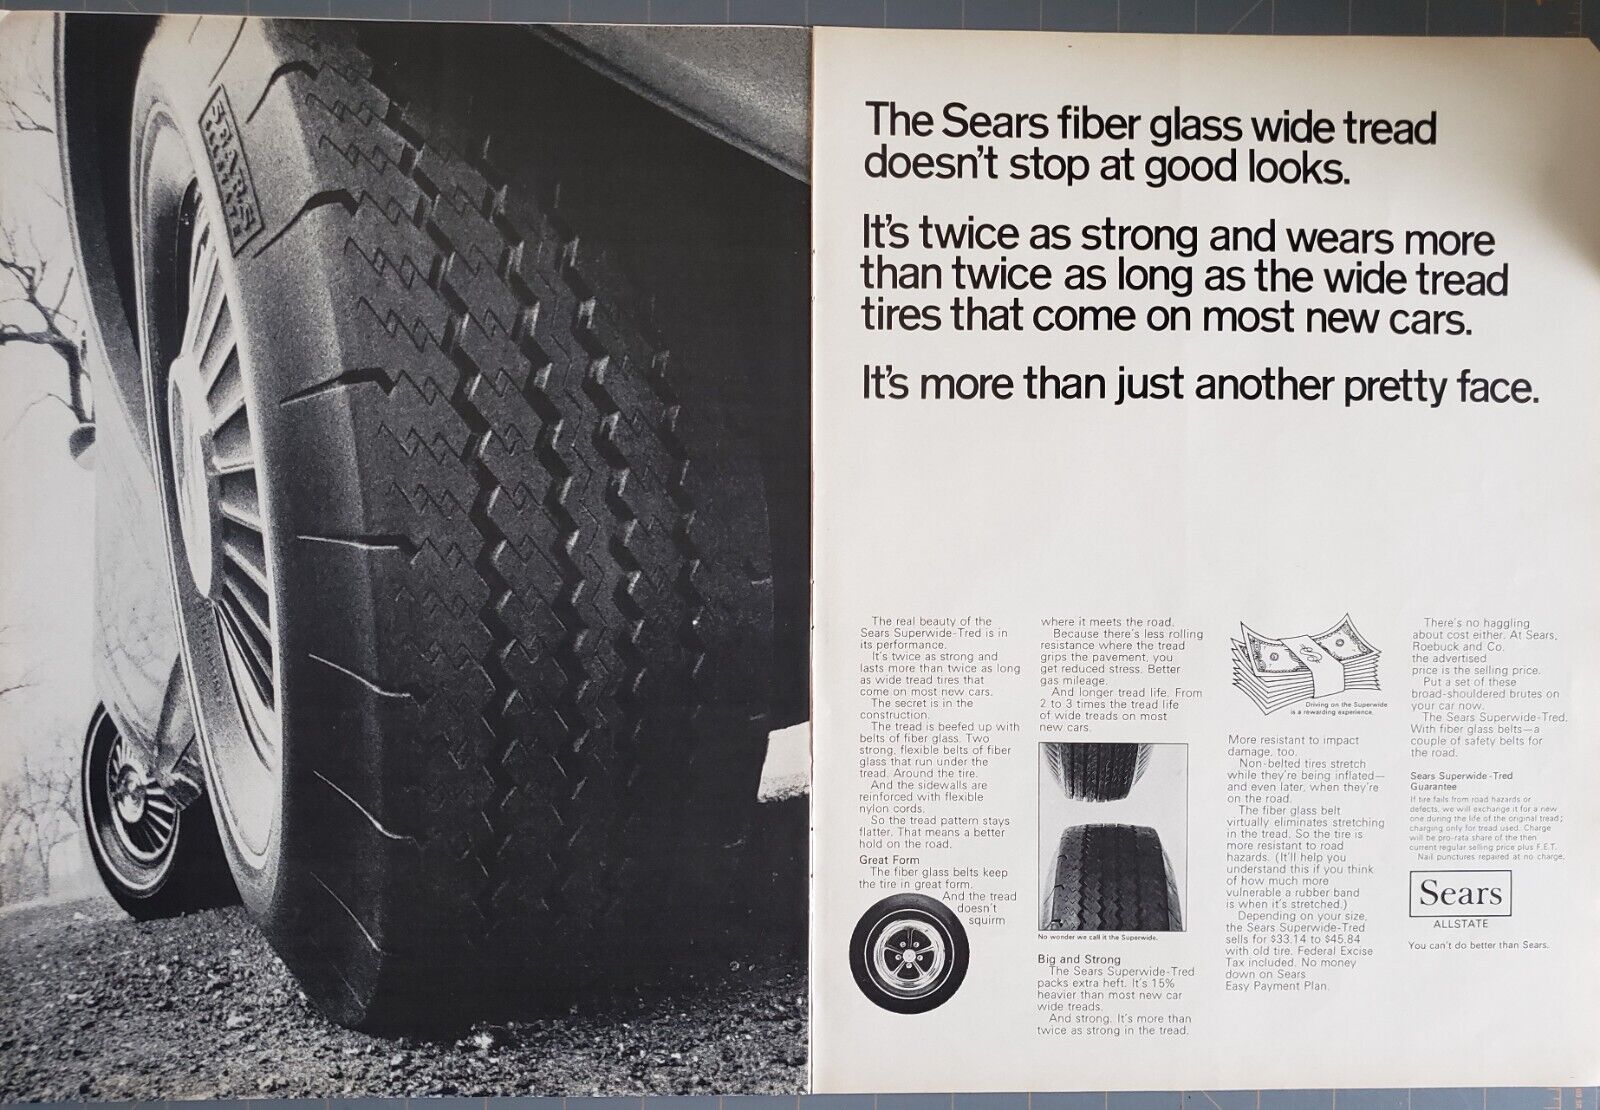 1968 Sears Allstate Tires Fiber Glass Wide Tread Twice As Strong 2 Page Print Ad